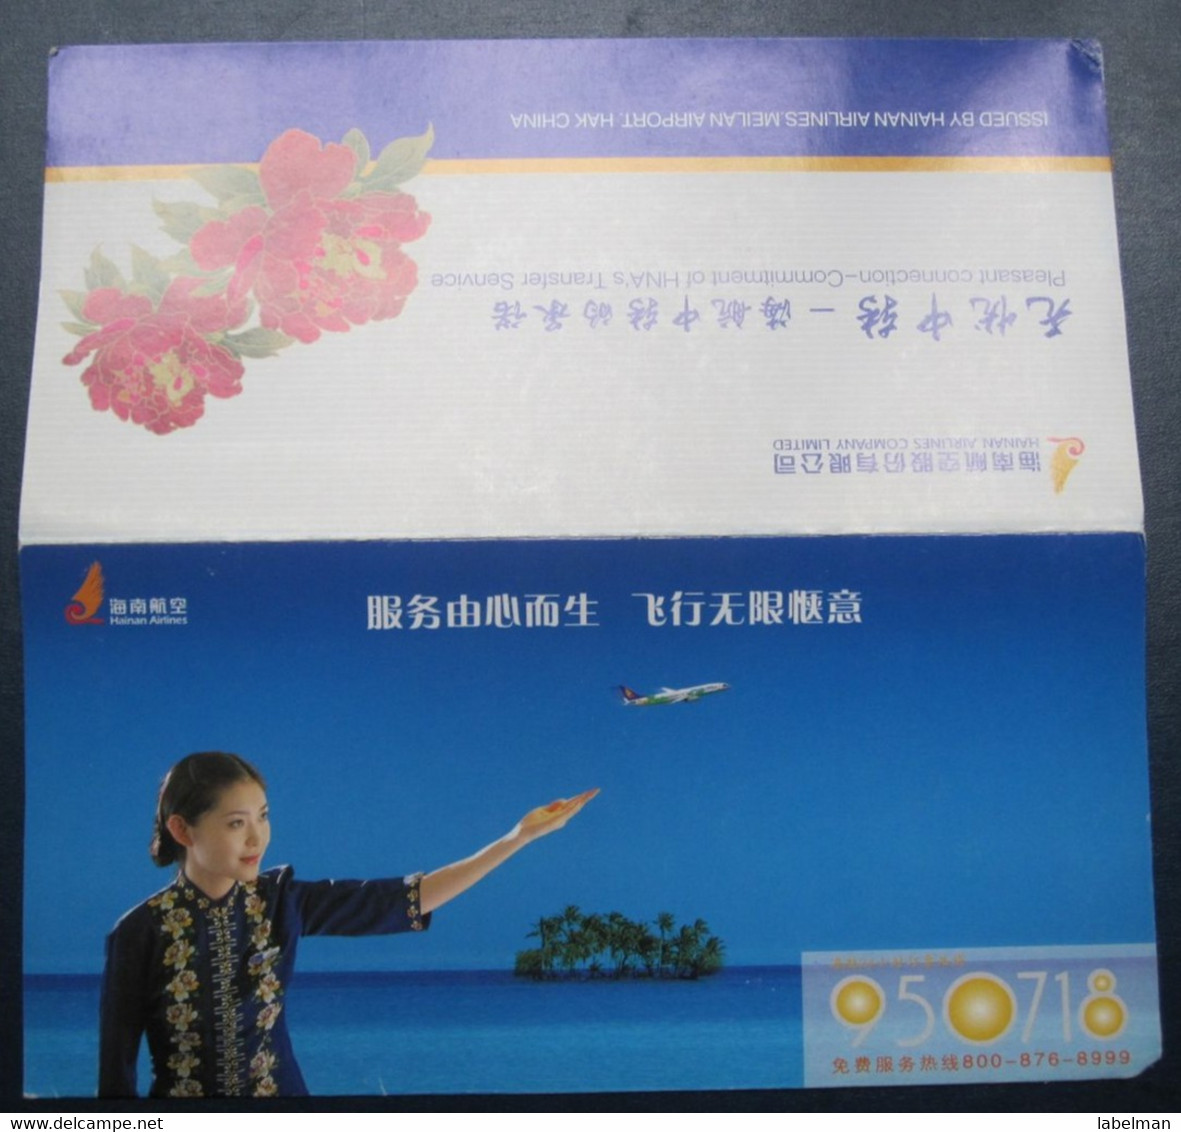 HAINAN MEILAN CHINA AIRWAYS AIRLINE TICKET HOLDER BOOKLET VIP TAG LUGGAGE BAGGAGE PLANE AIRCRAFT AIRPORT - Mondo